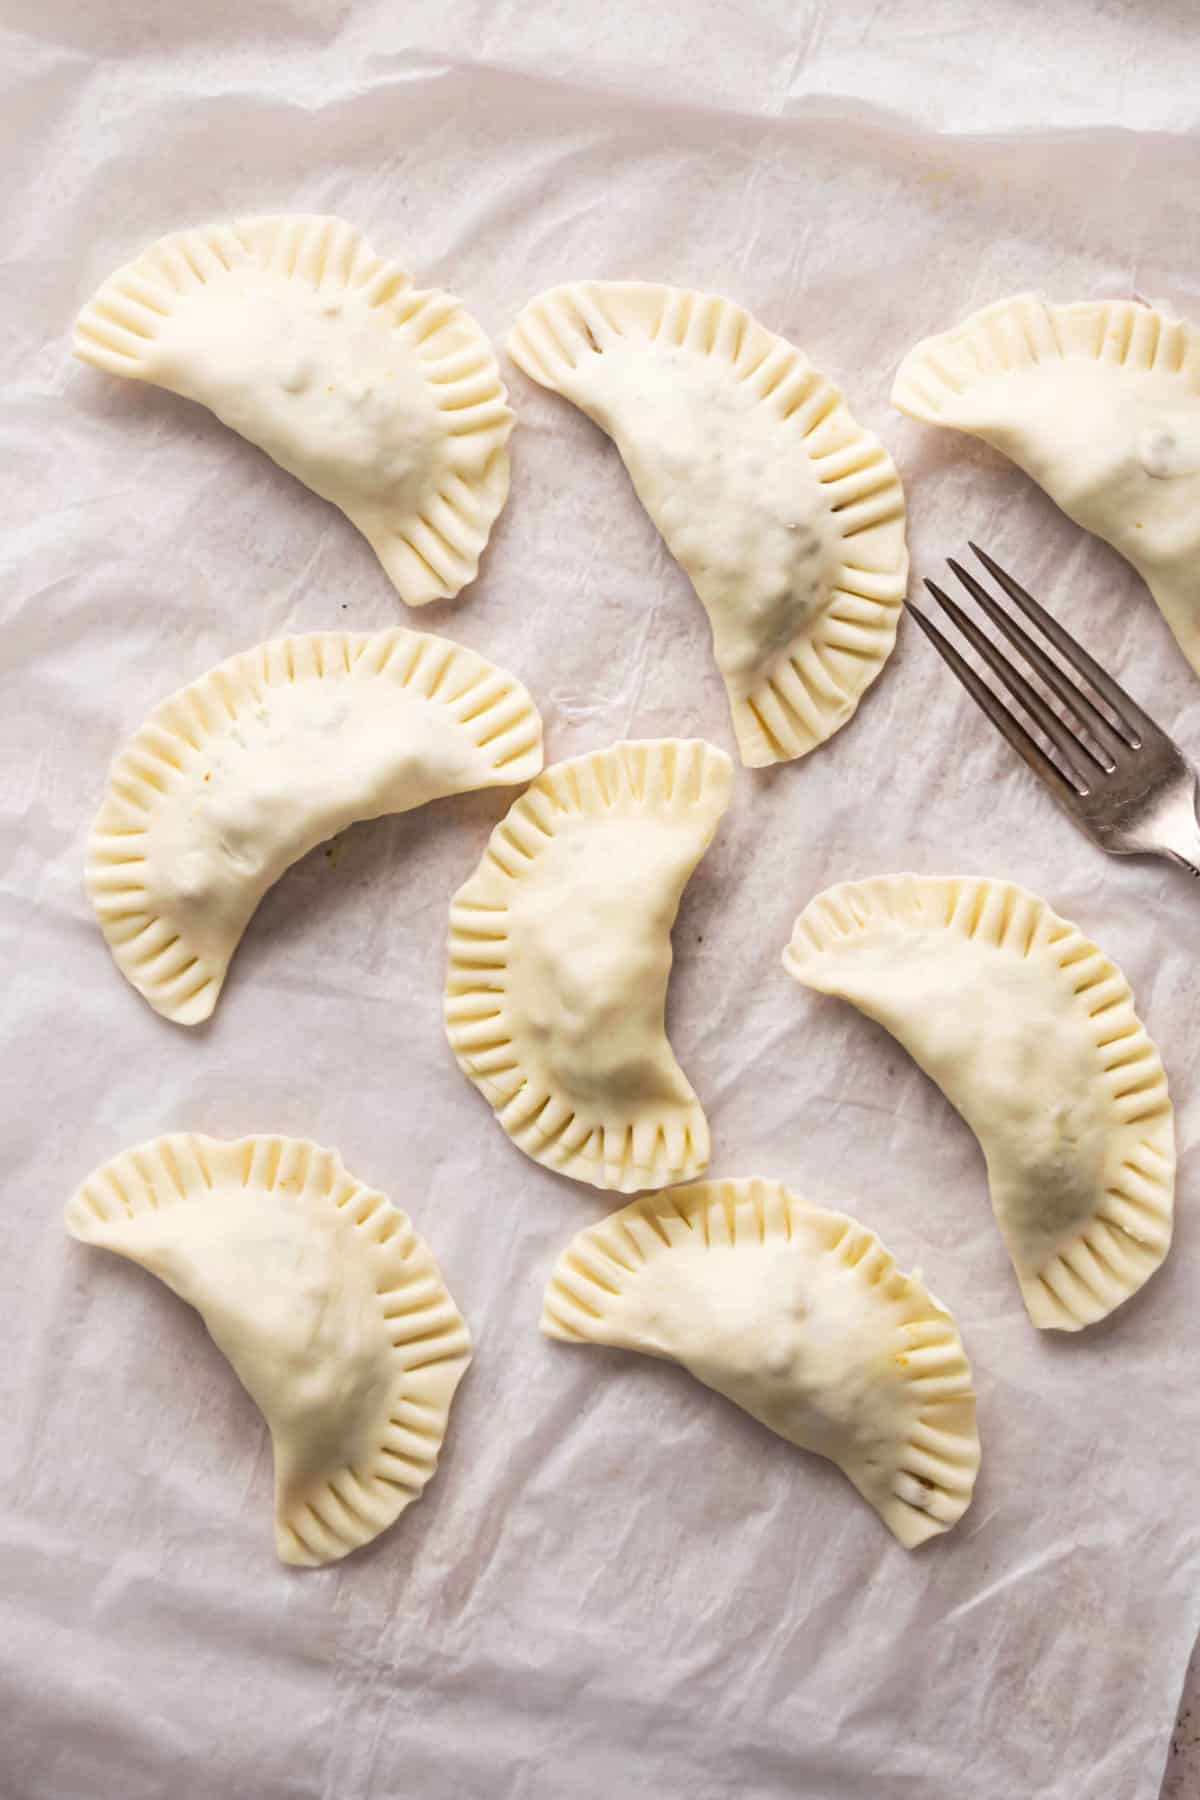 crimped edges of small meat pies.